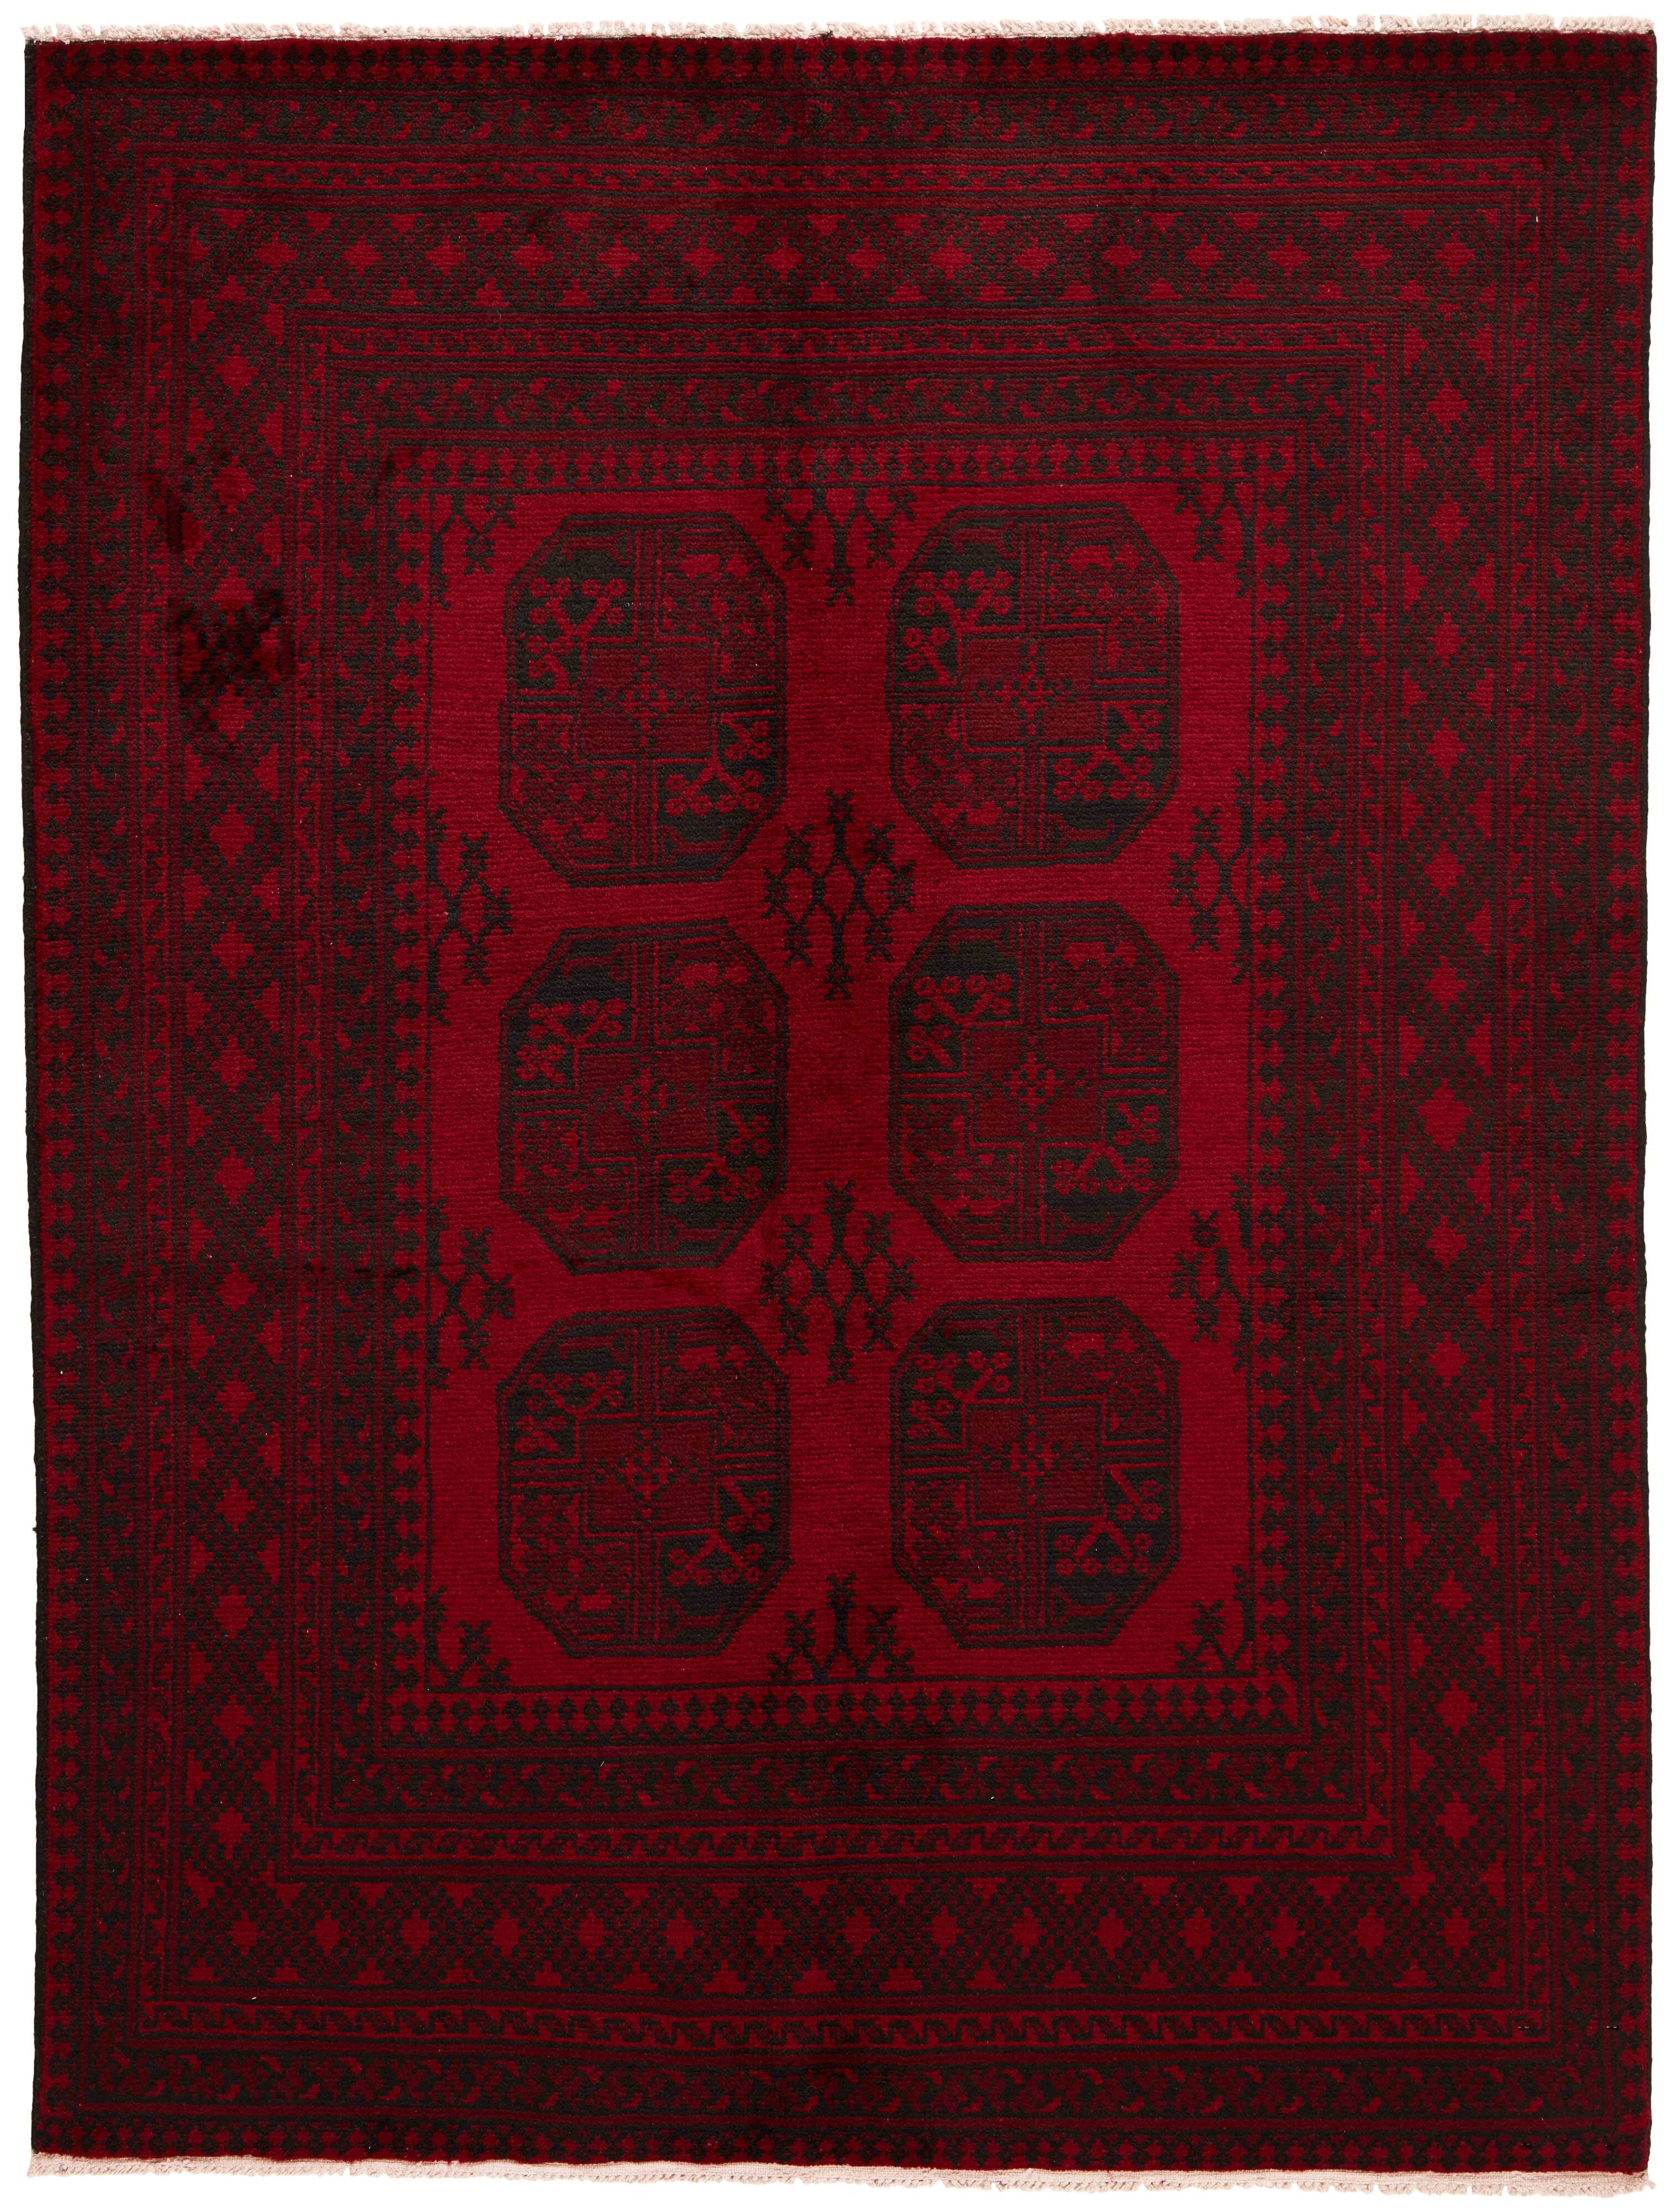 Red oriental rug with traditional Elephant's foot pattern